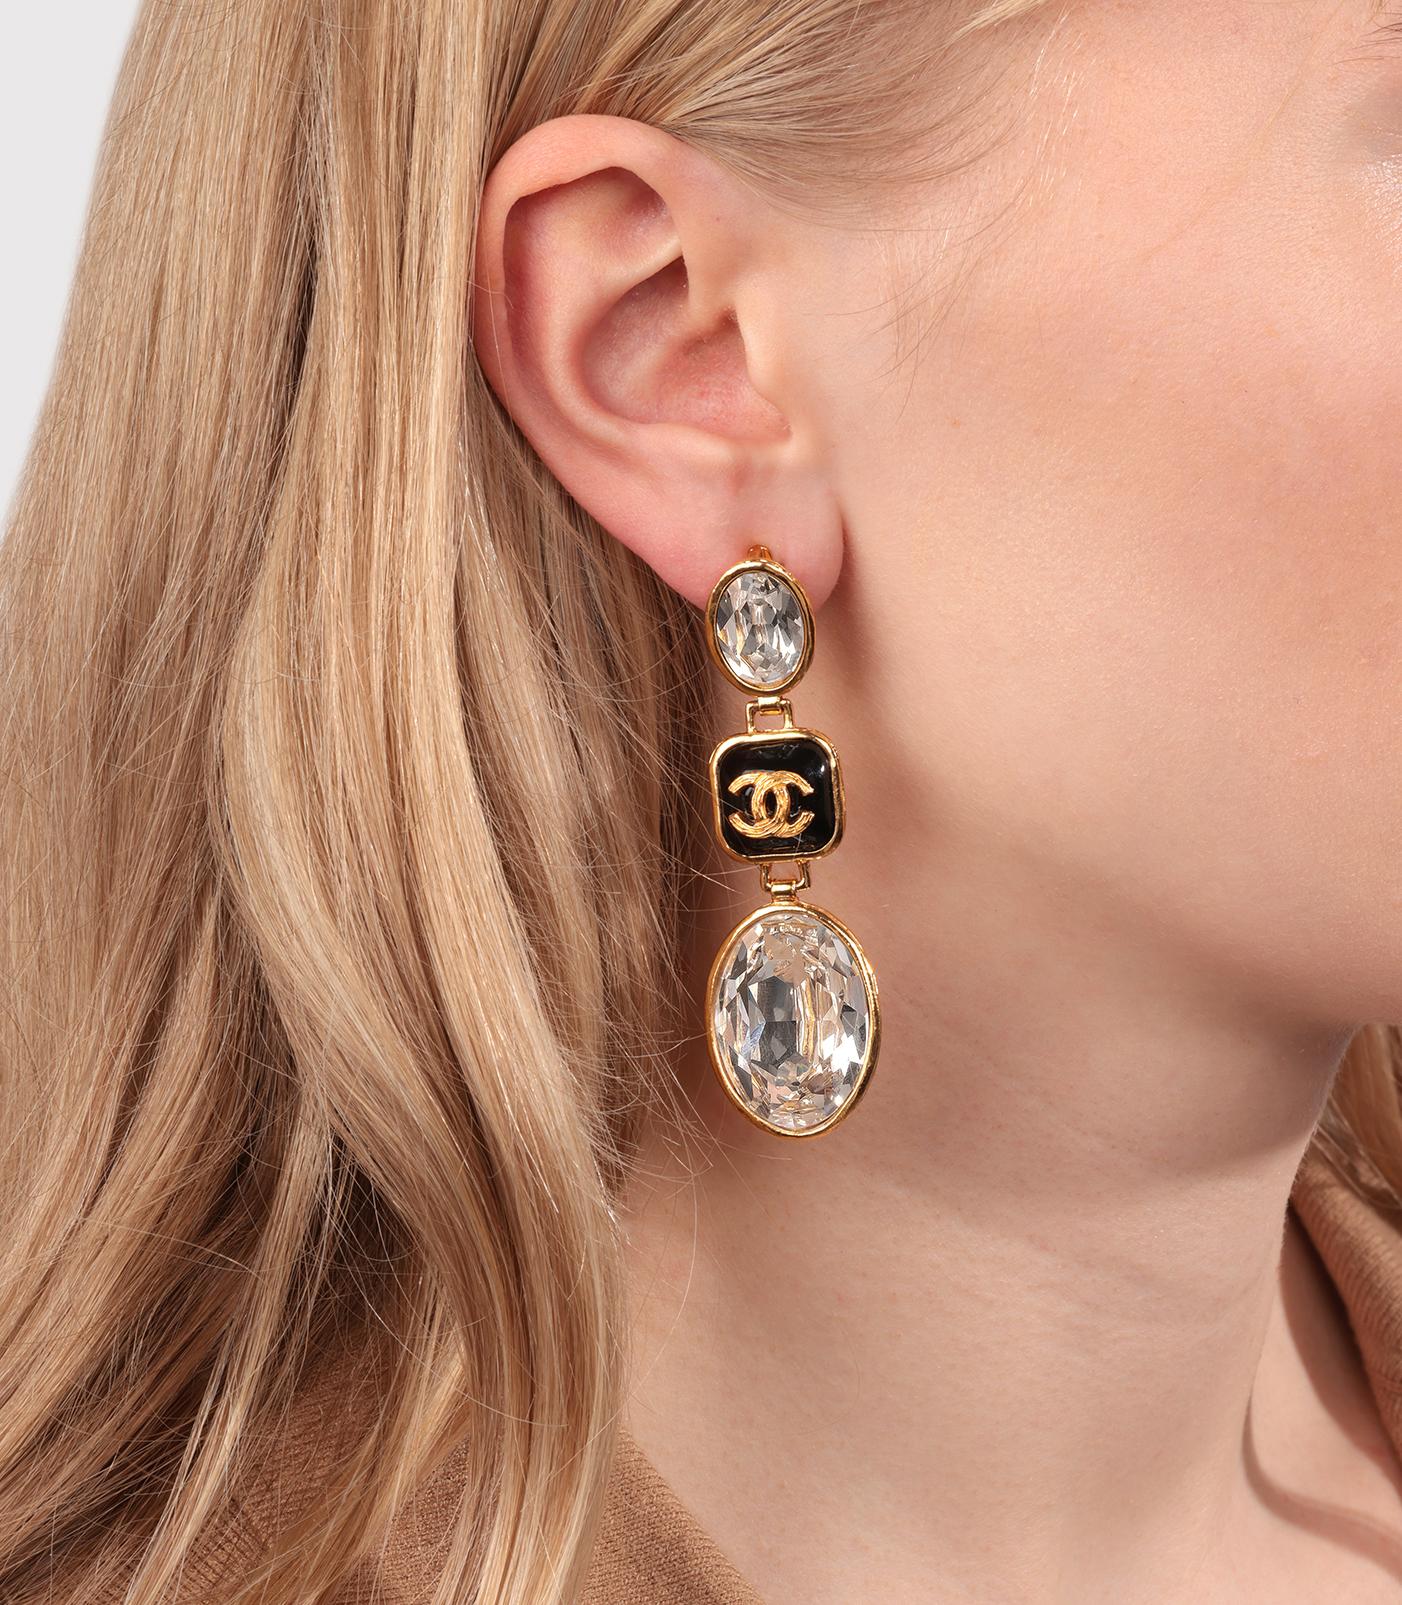 Chanel Crystal & Black Resin Gold Tone CC Drop Clip Earrings

Brand- Chanel
Model- CC Drop Clip Earrings
Product Type- Earrings
Serial Number- G21V
Age- Circa 2021
Material(s)- Gold Tone Metal

Earring Length- 7.3cm
Earring Width- 25mm
Earring Back-